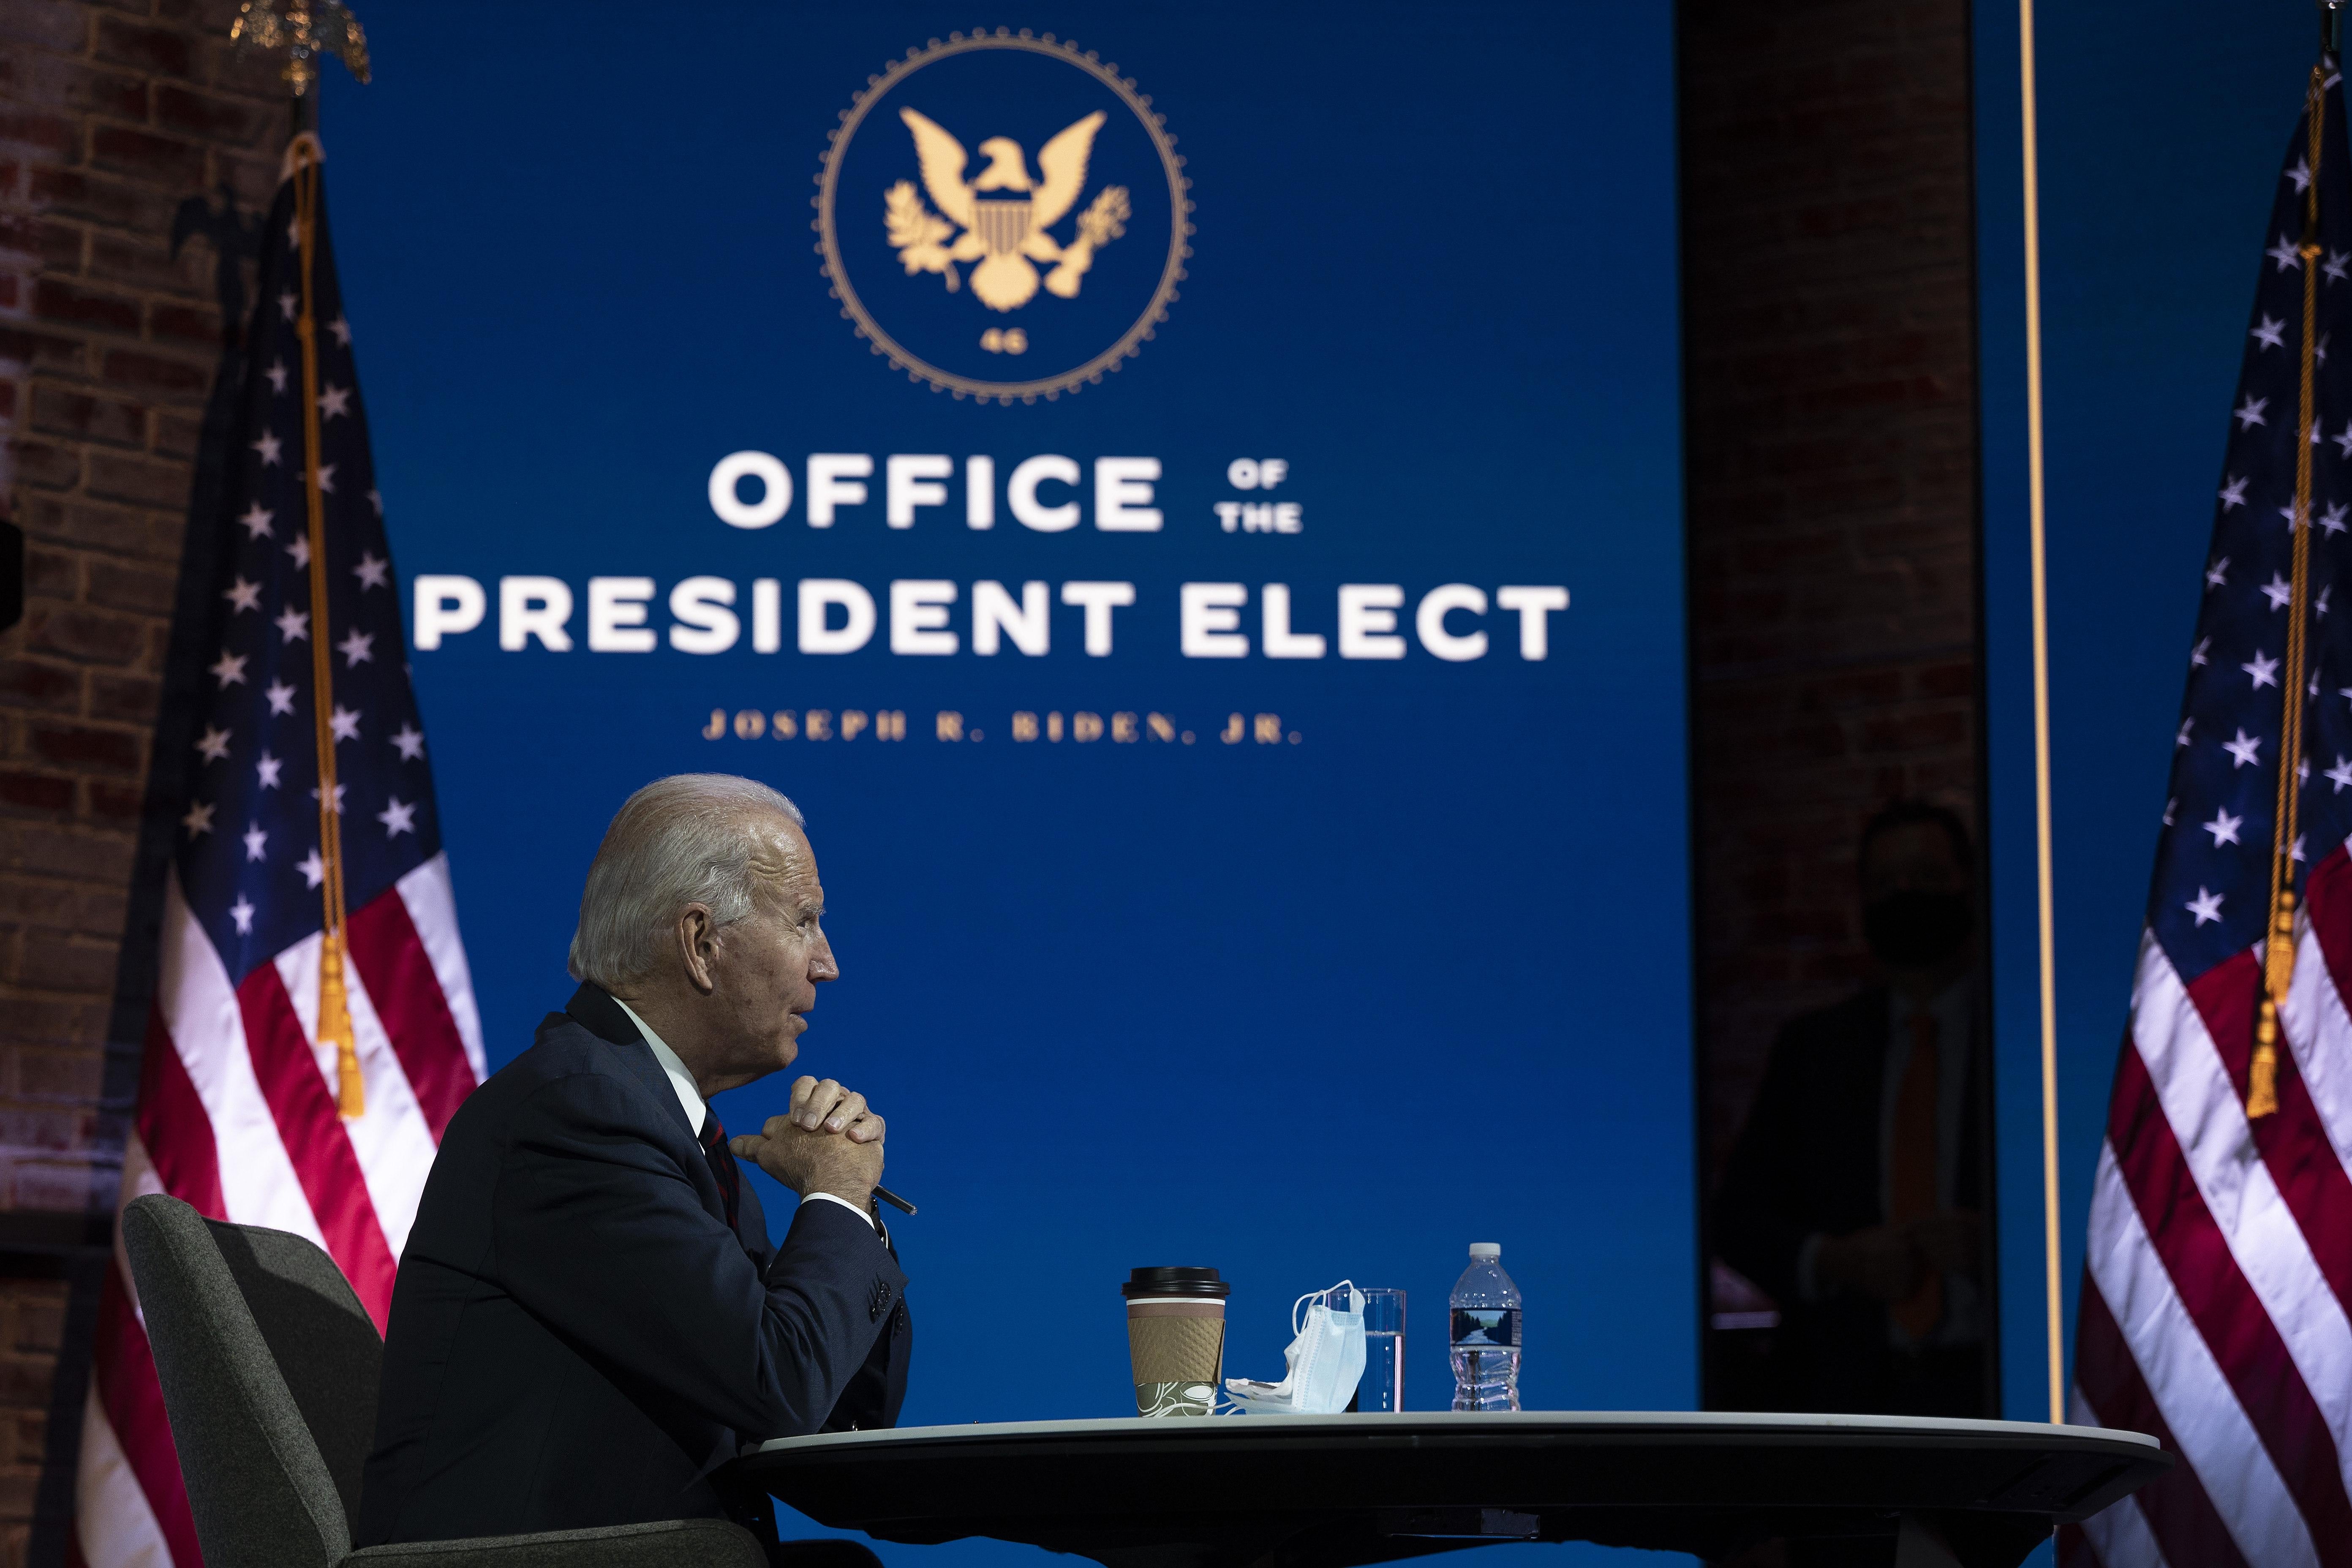 Joe Biden rests his elbows on a table with text reading "Office of the President Elect" behind him.